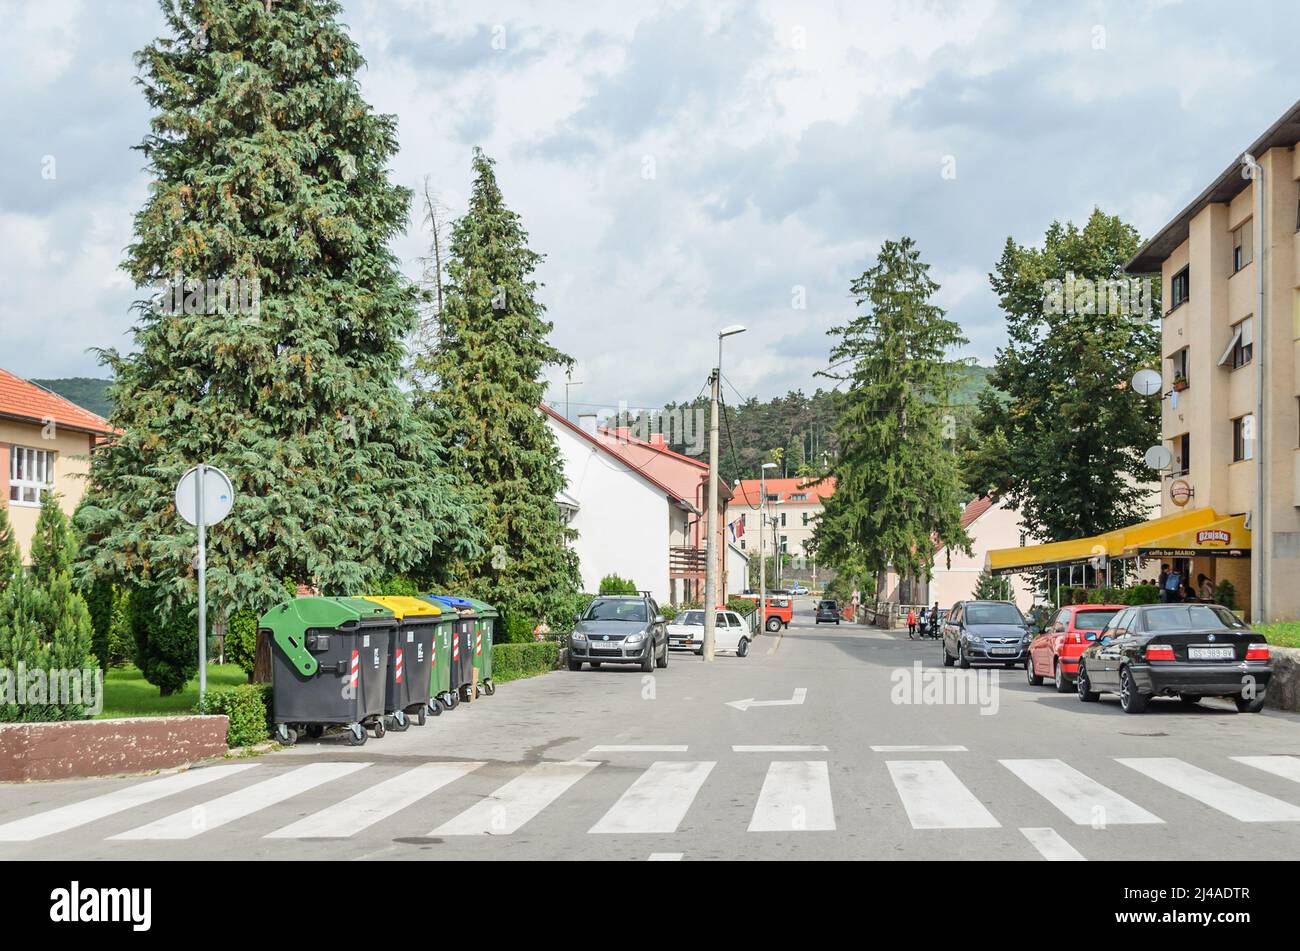 Main Road of a Small Provincial Town in Croatia. Beautiful Place, Clean, with Green Trees and Vehicles Parked Aside. Stock Photo